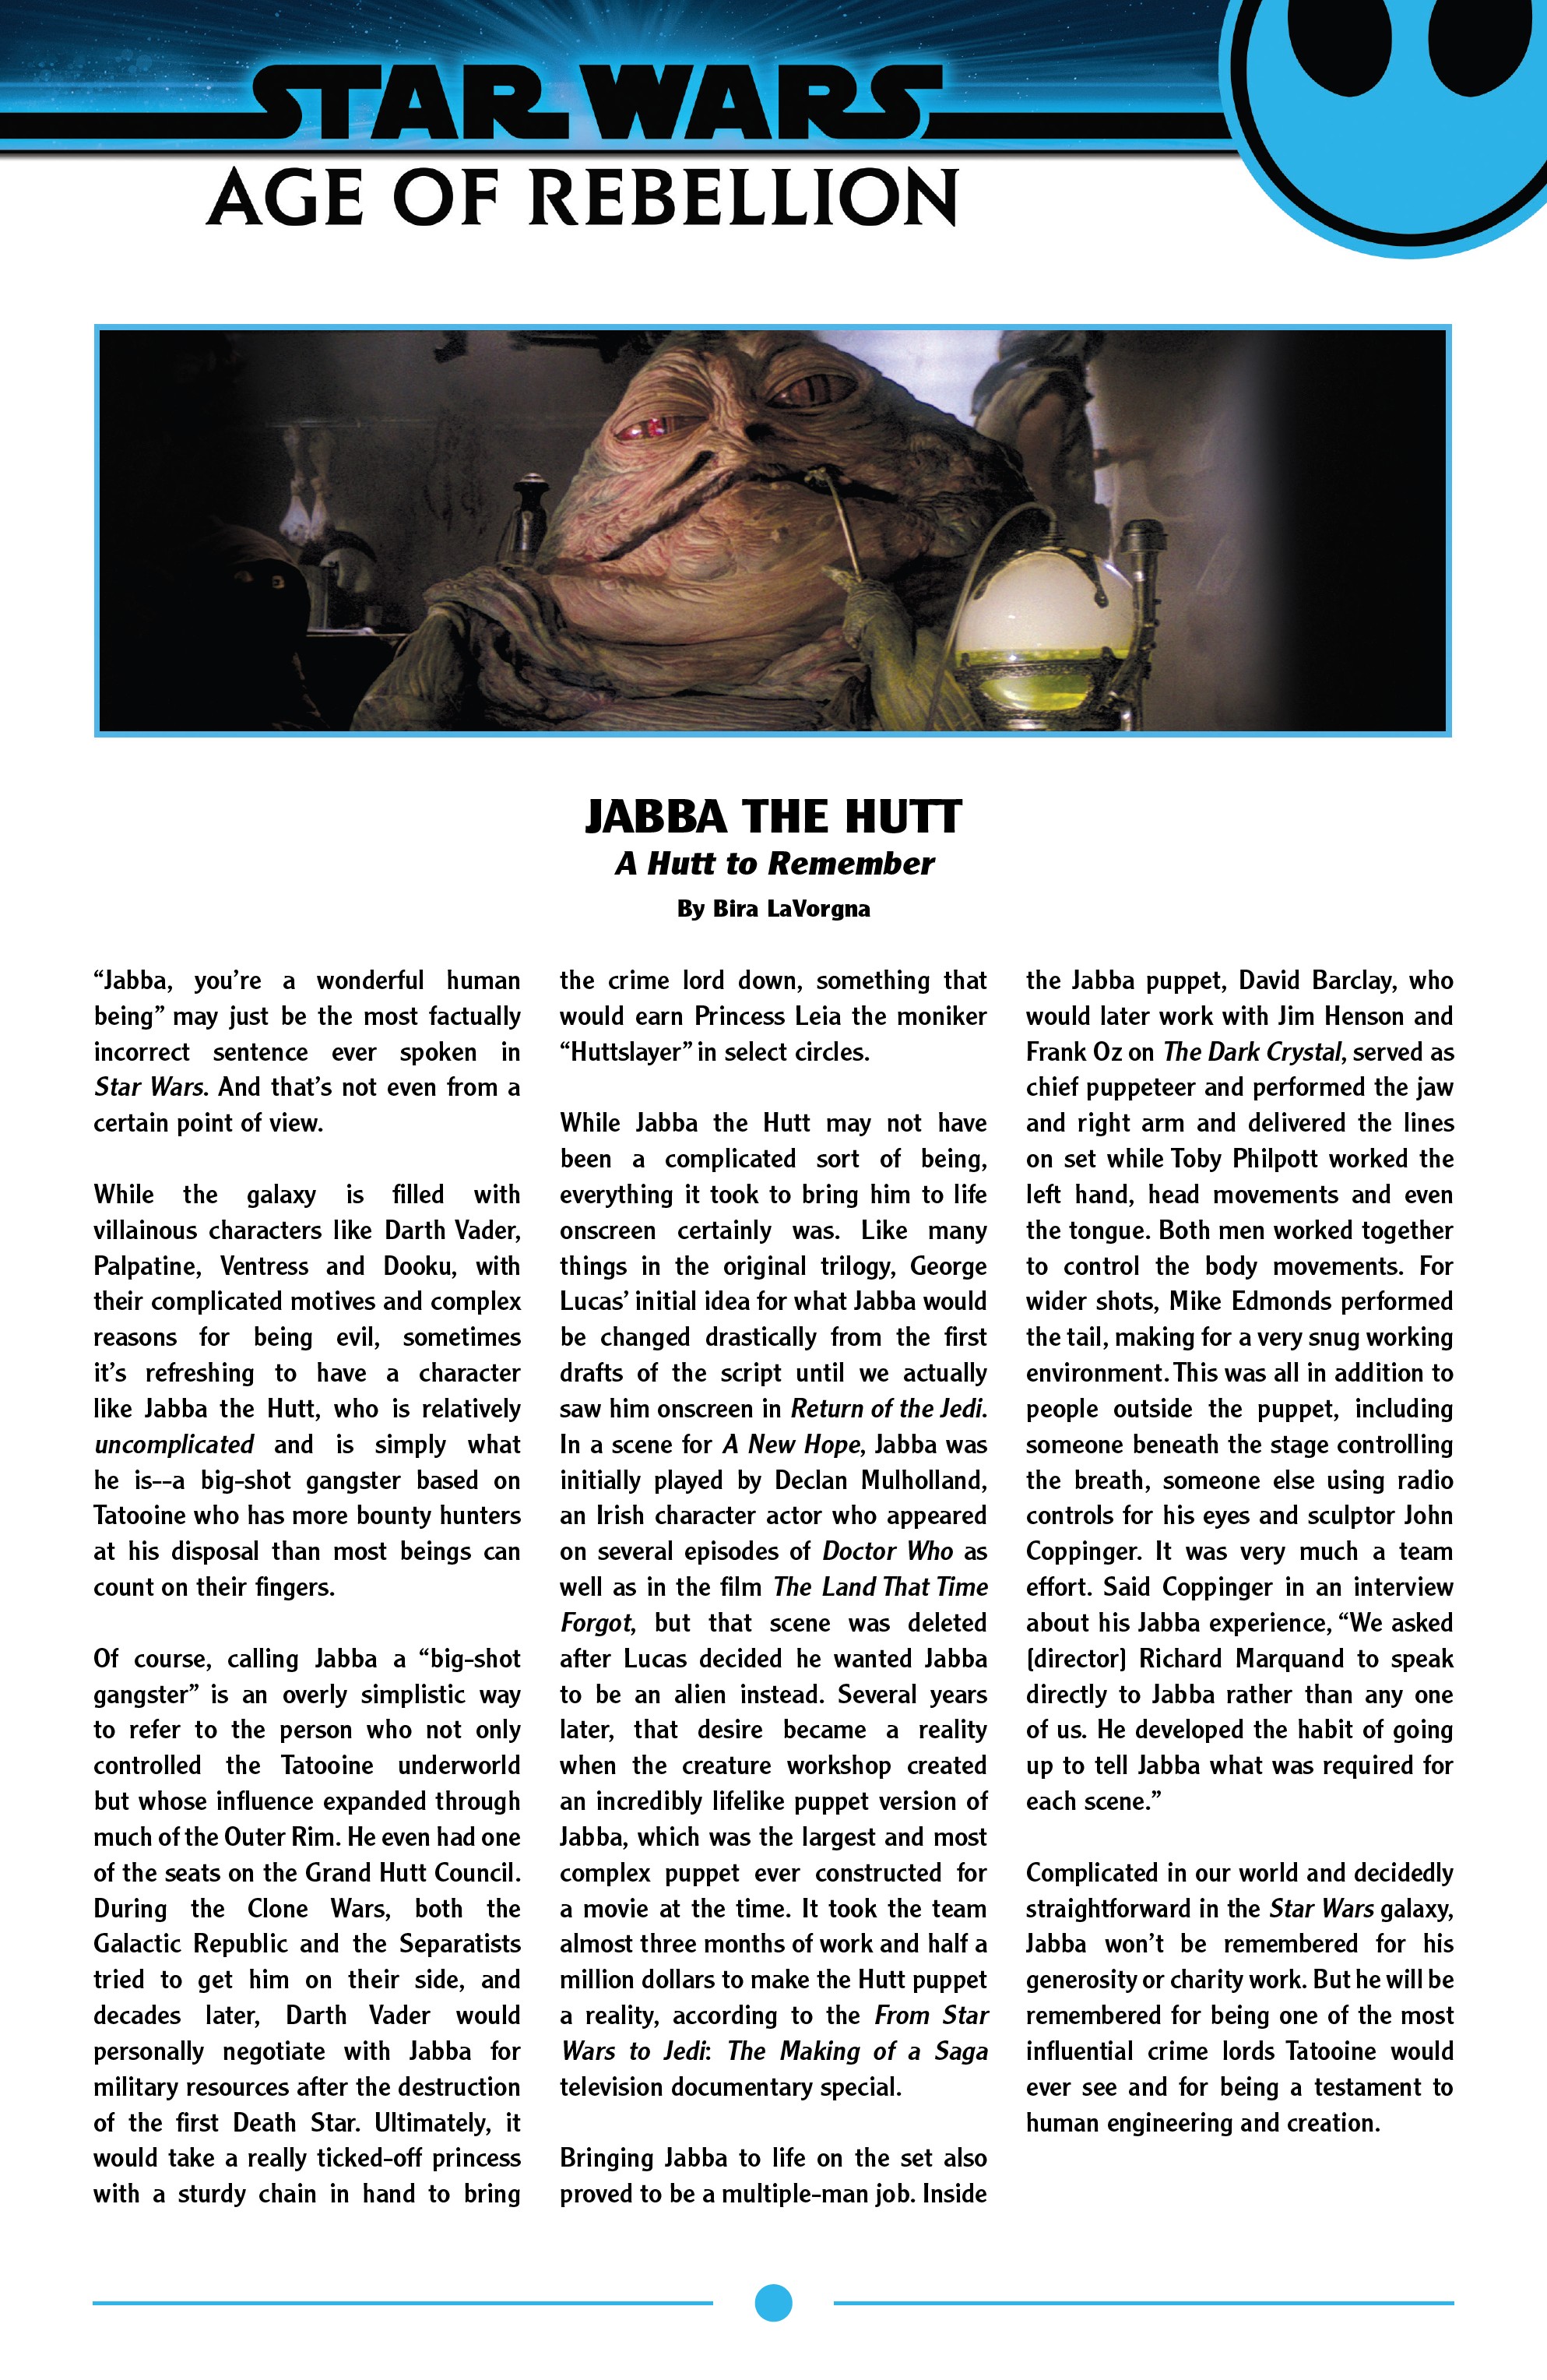 Read online Star Wars: Age Of Rebellion comic -  Issue # Jabba The Hutt - 24